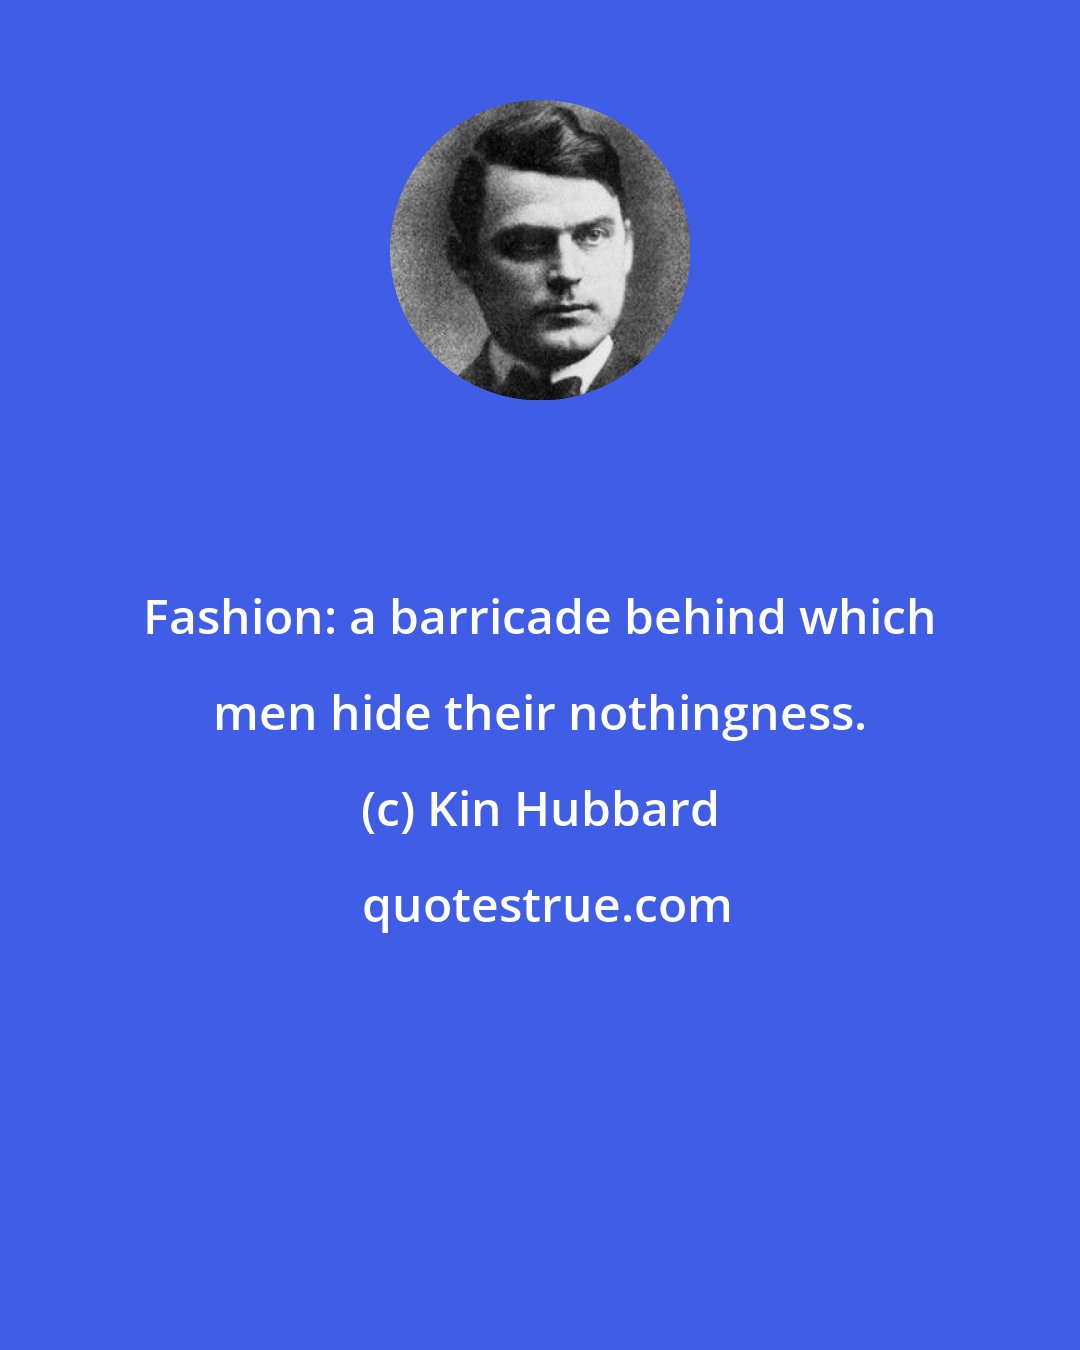 Kin Hubbard: Fashion: a barricade behind which men hide their nothingness.